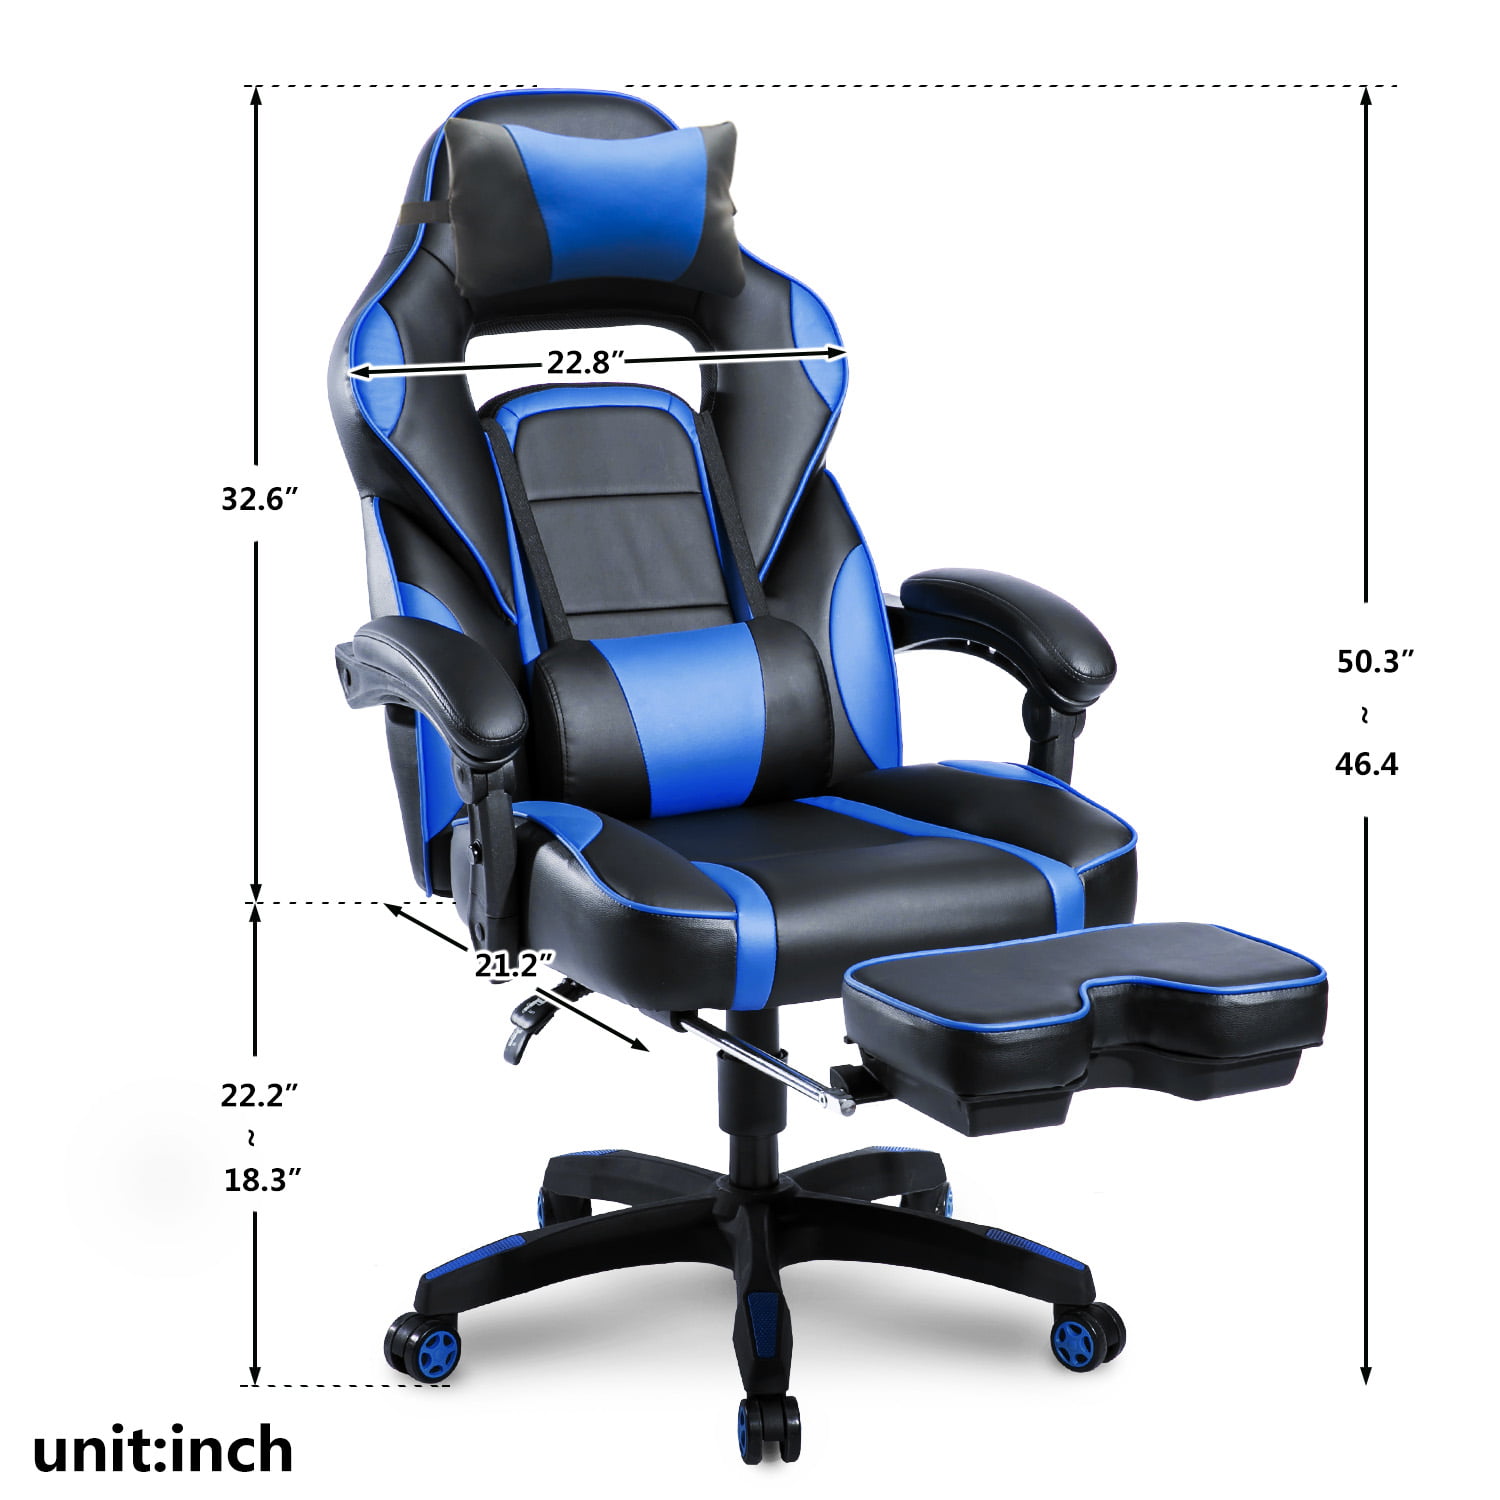 clearancegaming chair with footrest ergonomic computer chair with arms  large size pu leather swivel desk office chair with lumbar support 90175